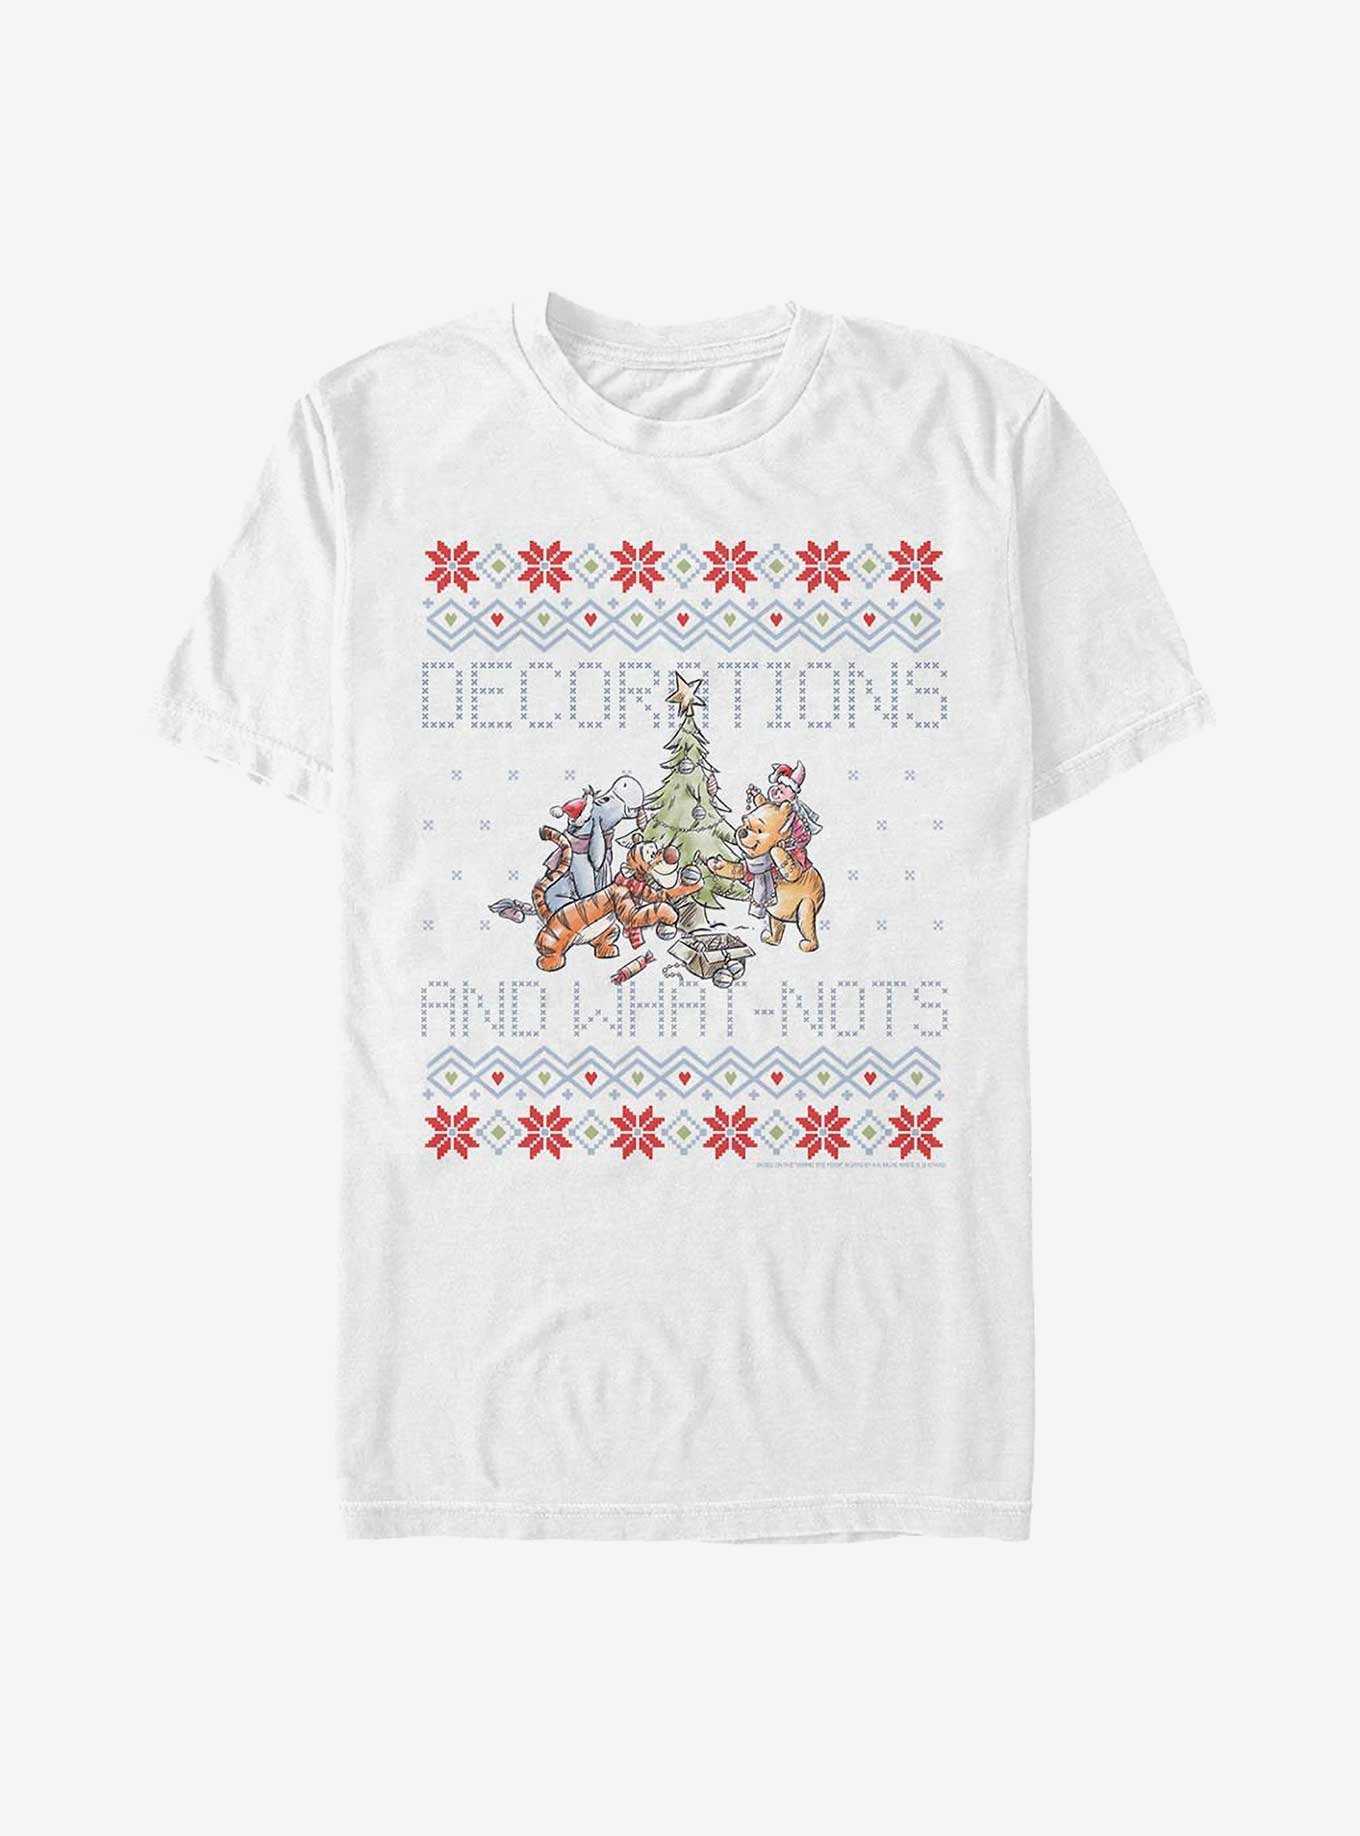 Disney Winnie The Pooh Decorations And What-Nots T-Shirt, , hi-res